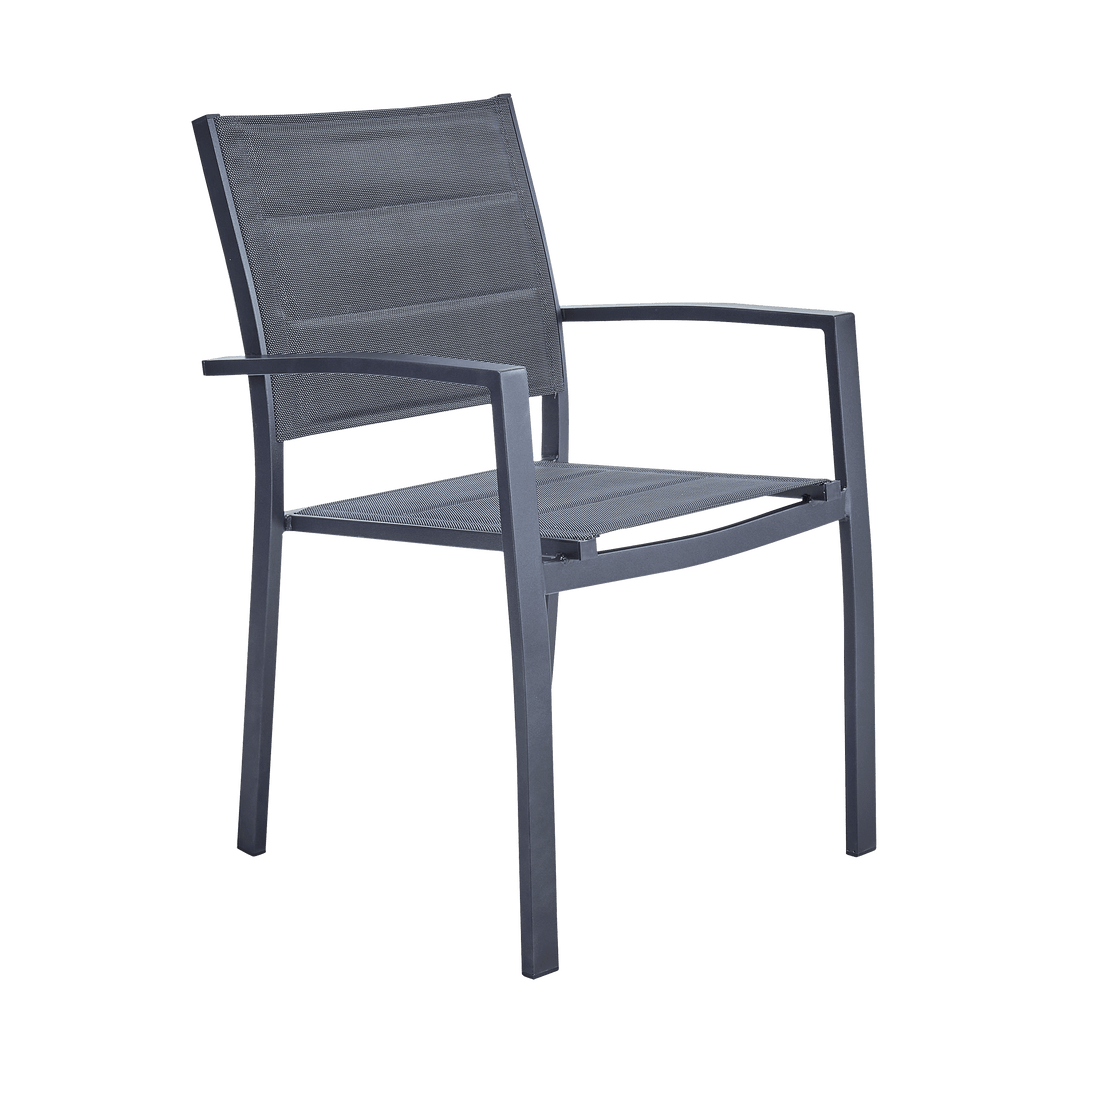 ORION BETA II NATERIAL Chair with armrests aluminum and textilene, padded, anthracite